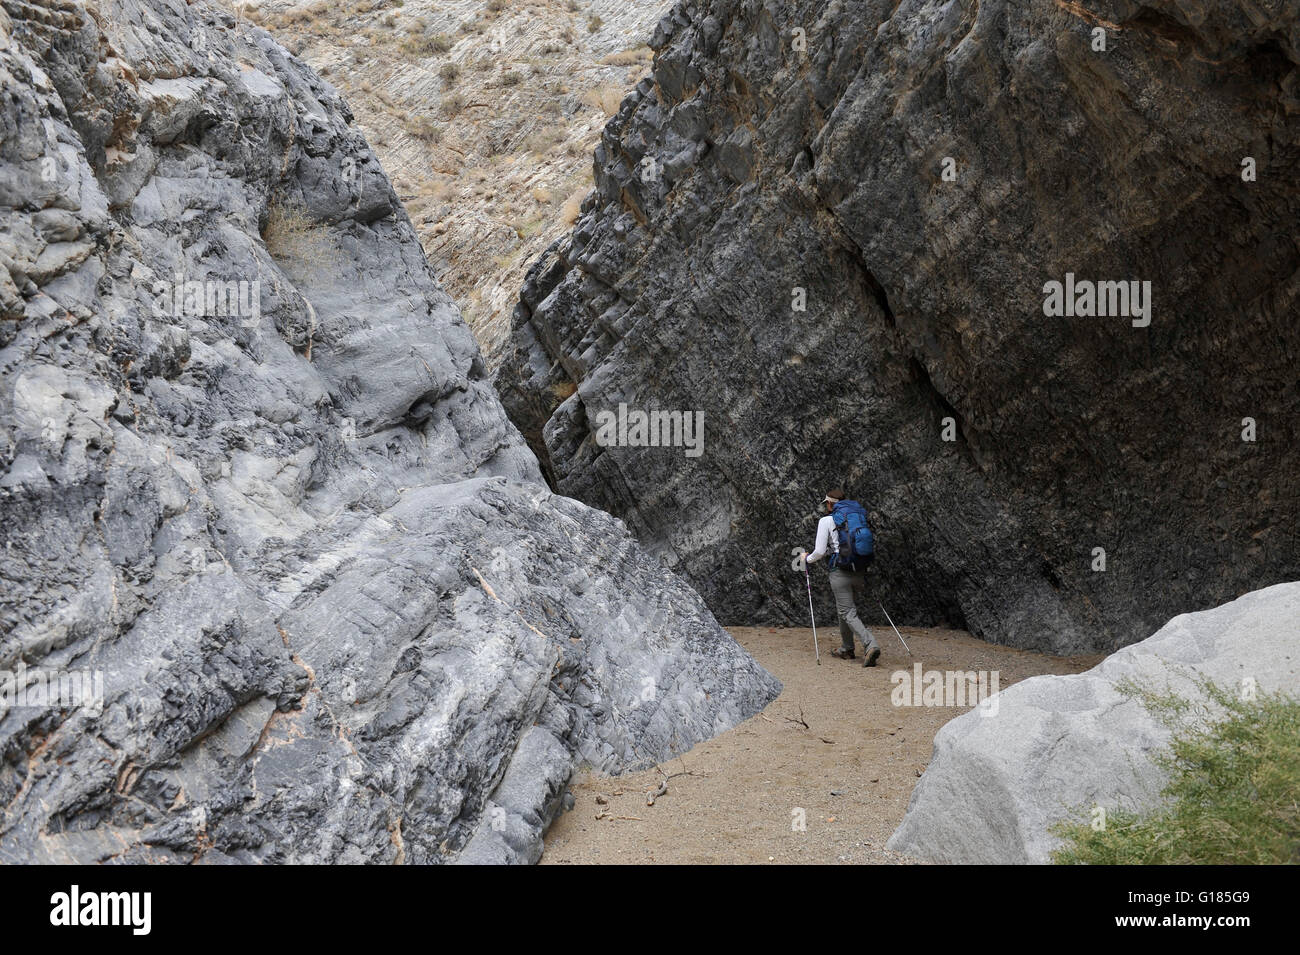 Hiker exploring rock formations, Marble Canyon, Death Valley National Park, California Stock Photo